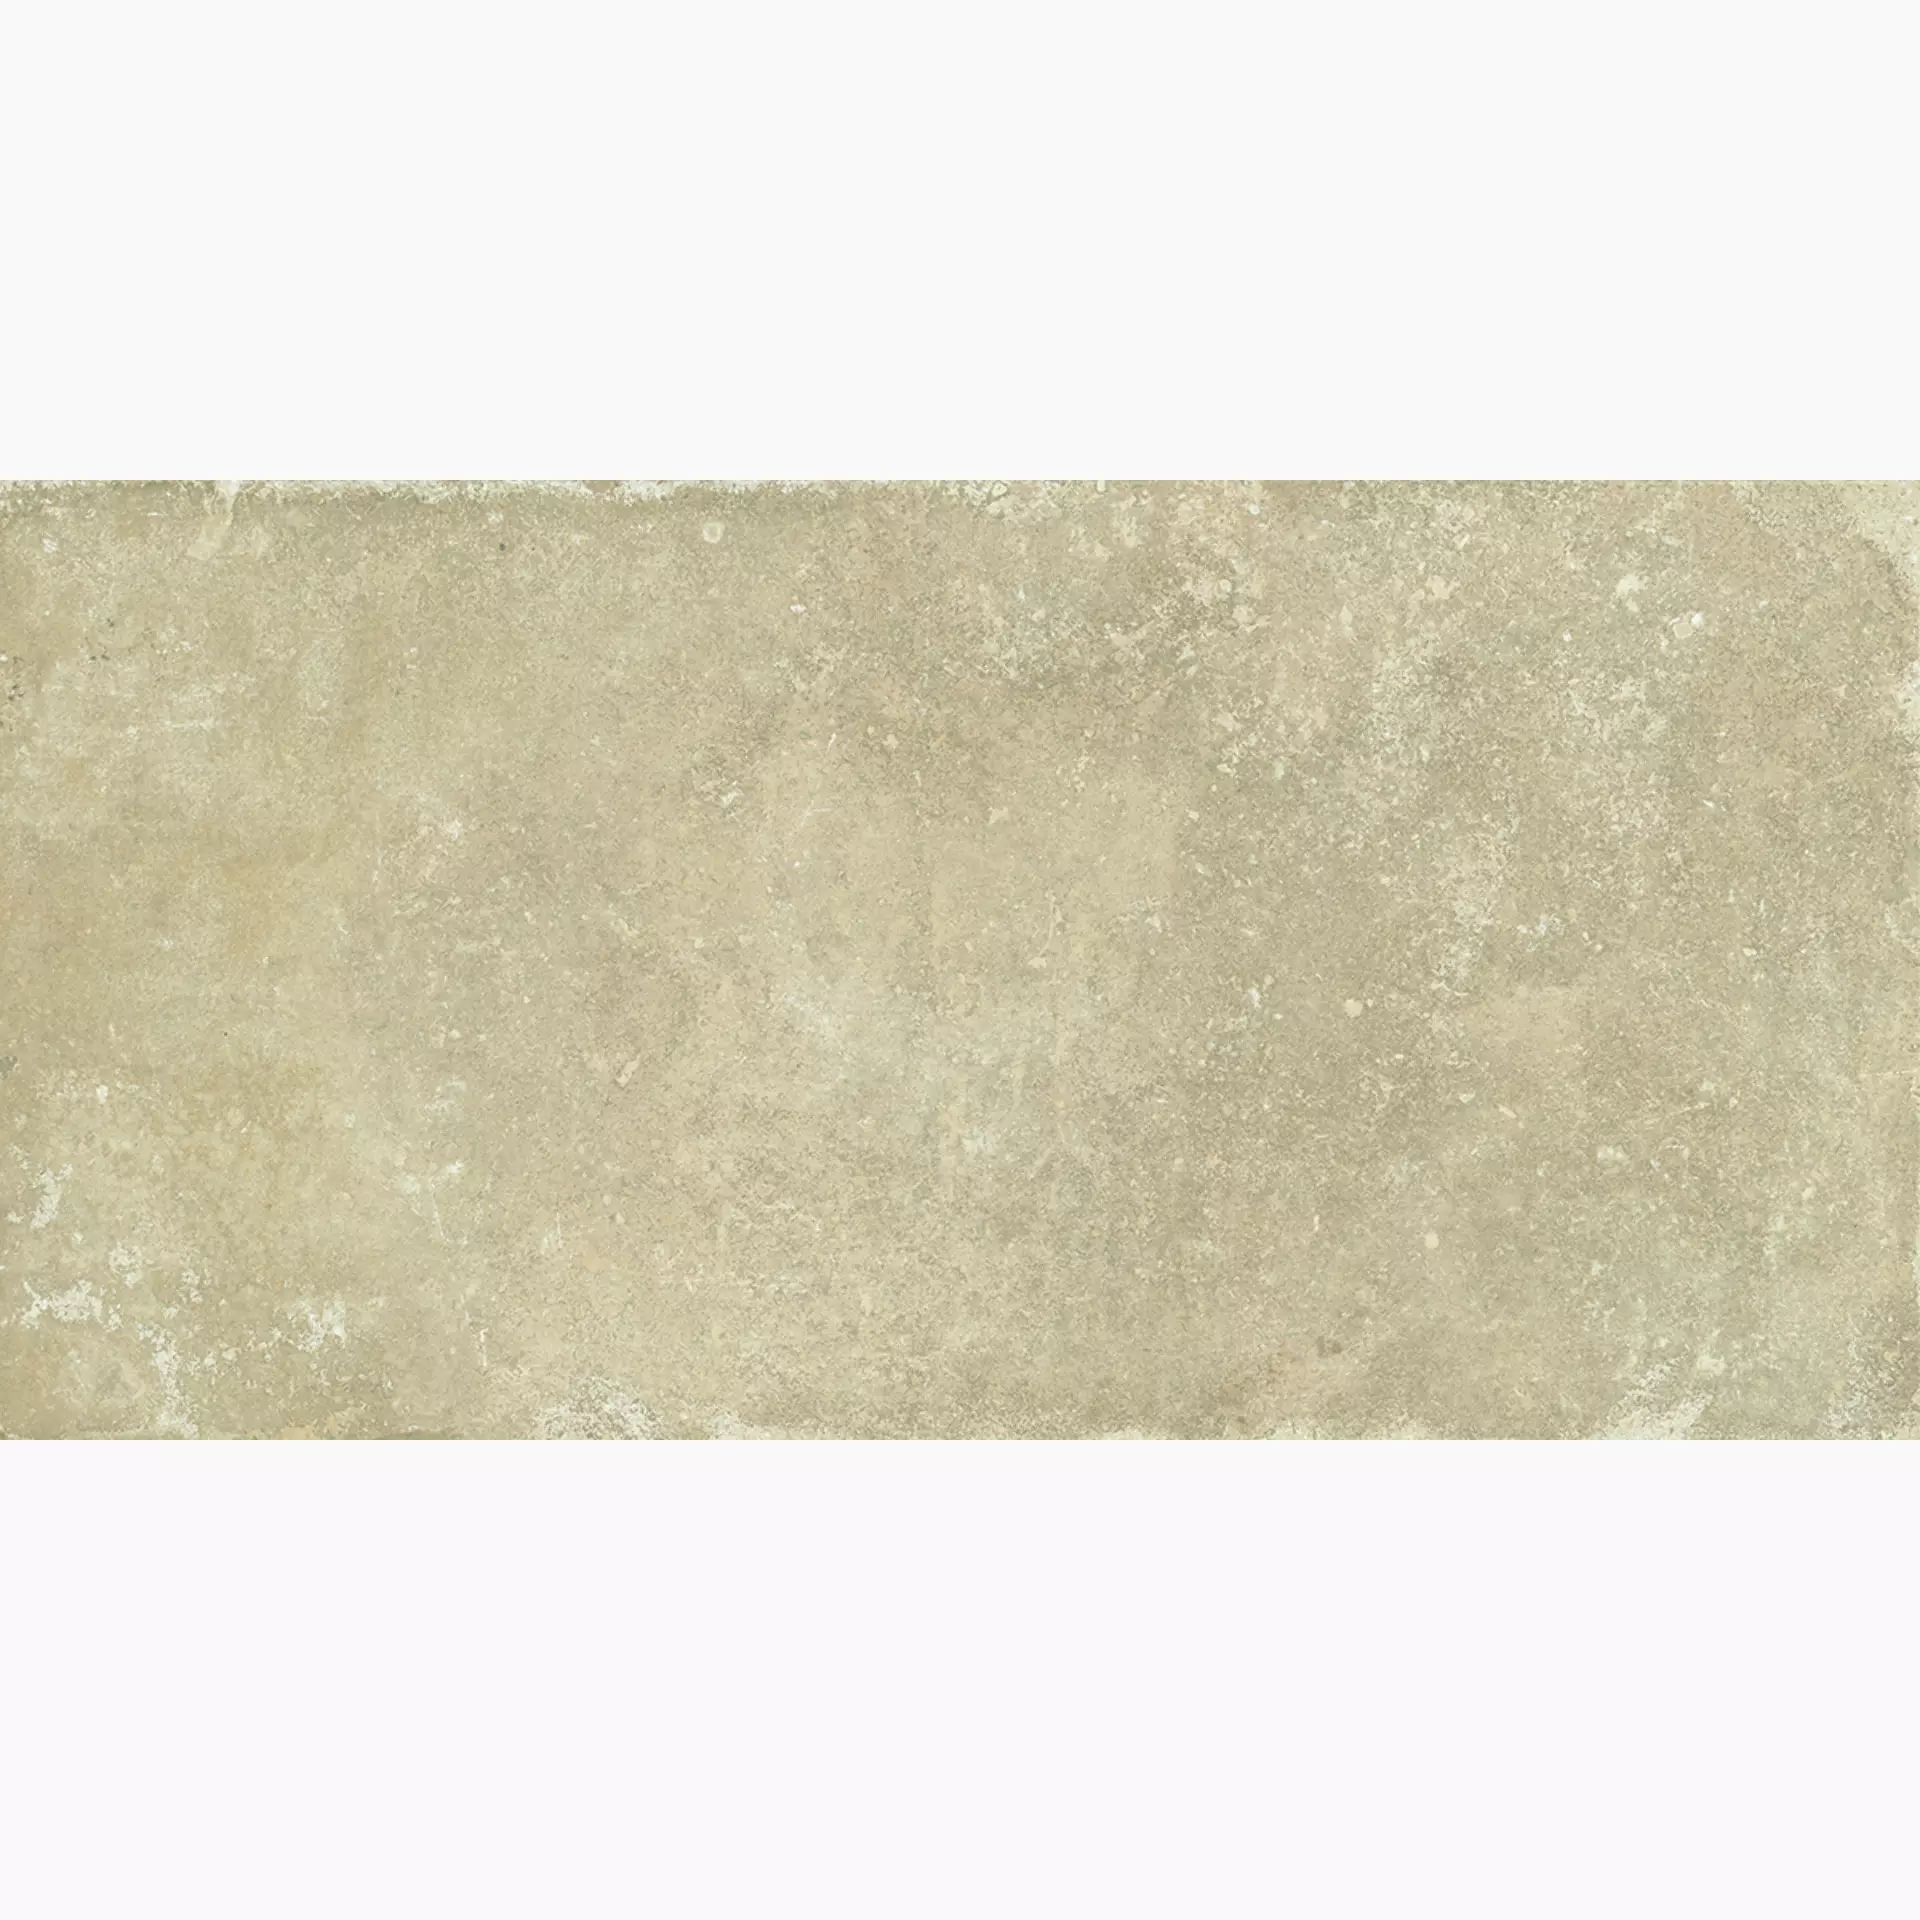 Alfalux Cottage Taupe Naturale 8290035 45x90cm rectified 10mm